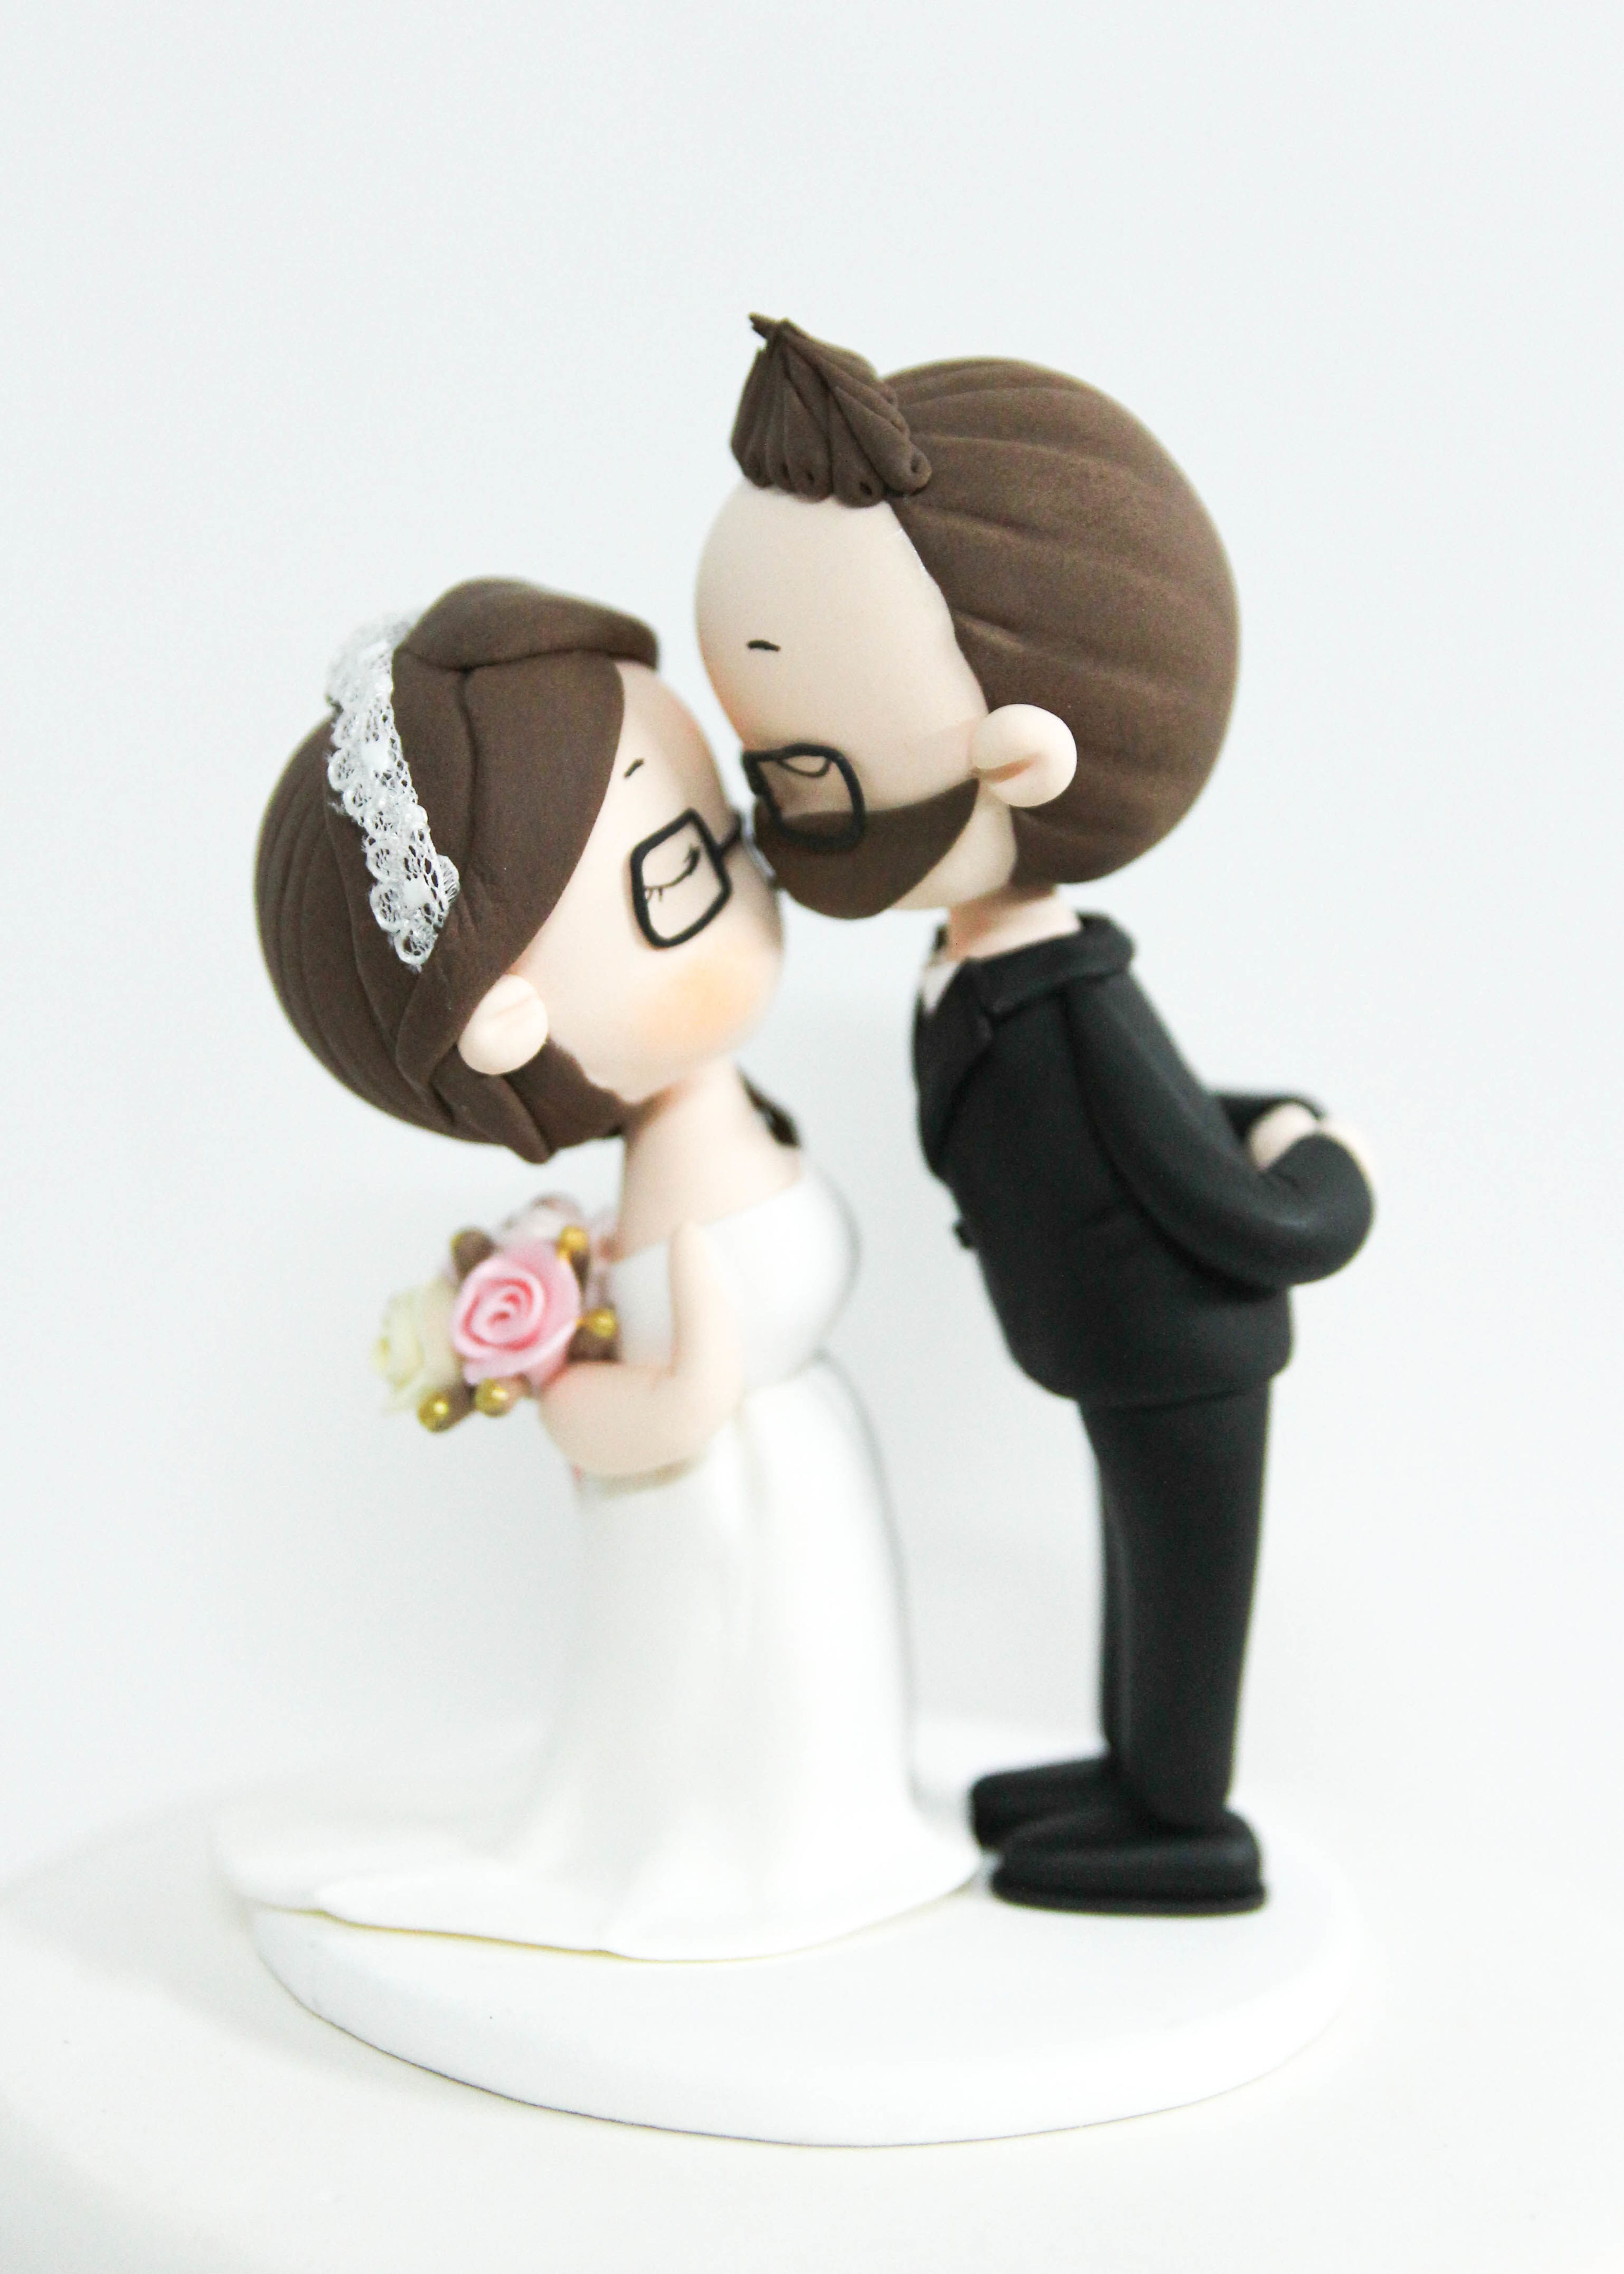 Picture of Nerdy Wedding Cake Topper, Bookworm bride & groom cake topper